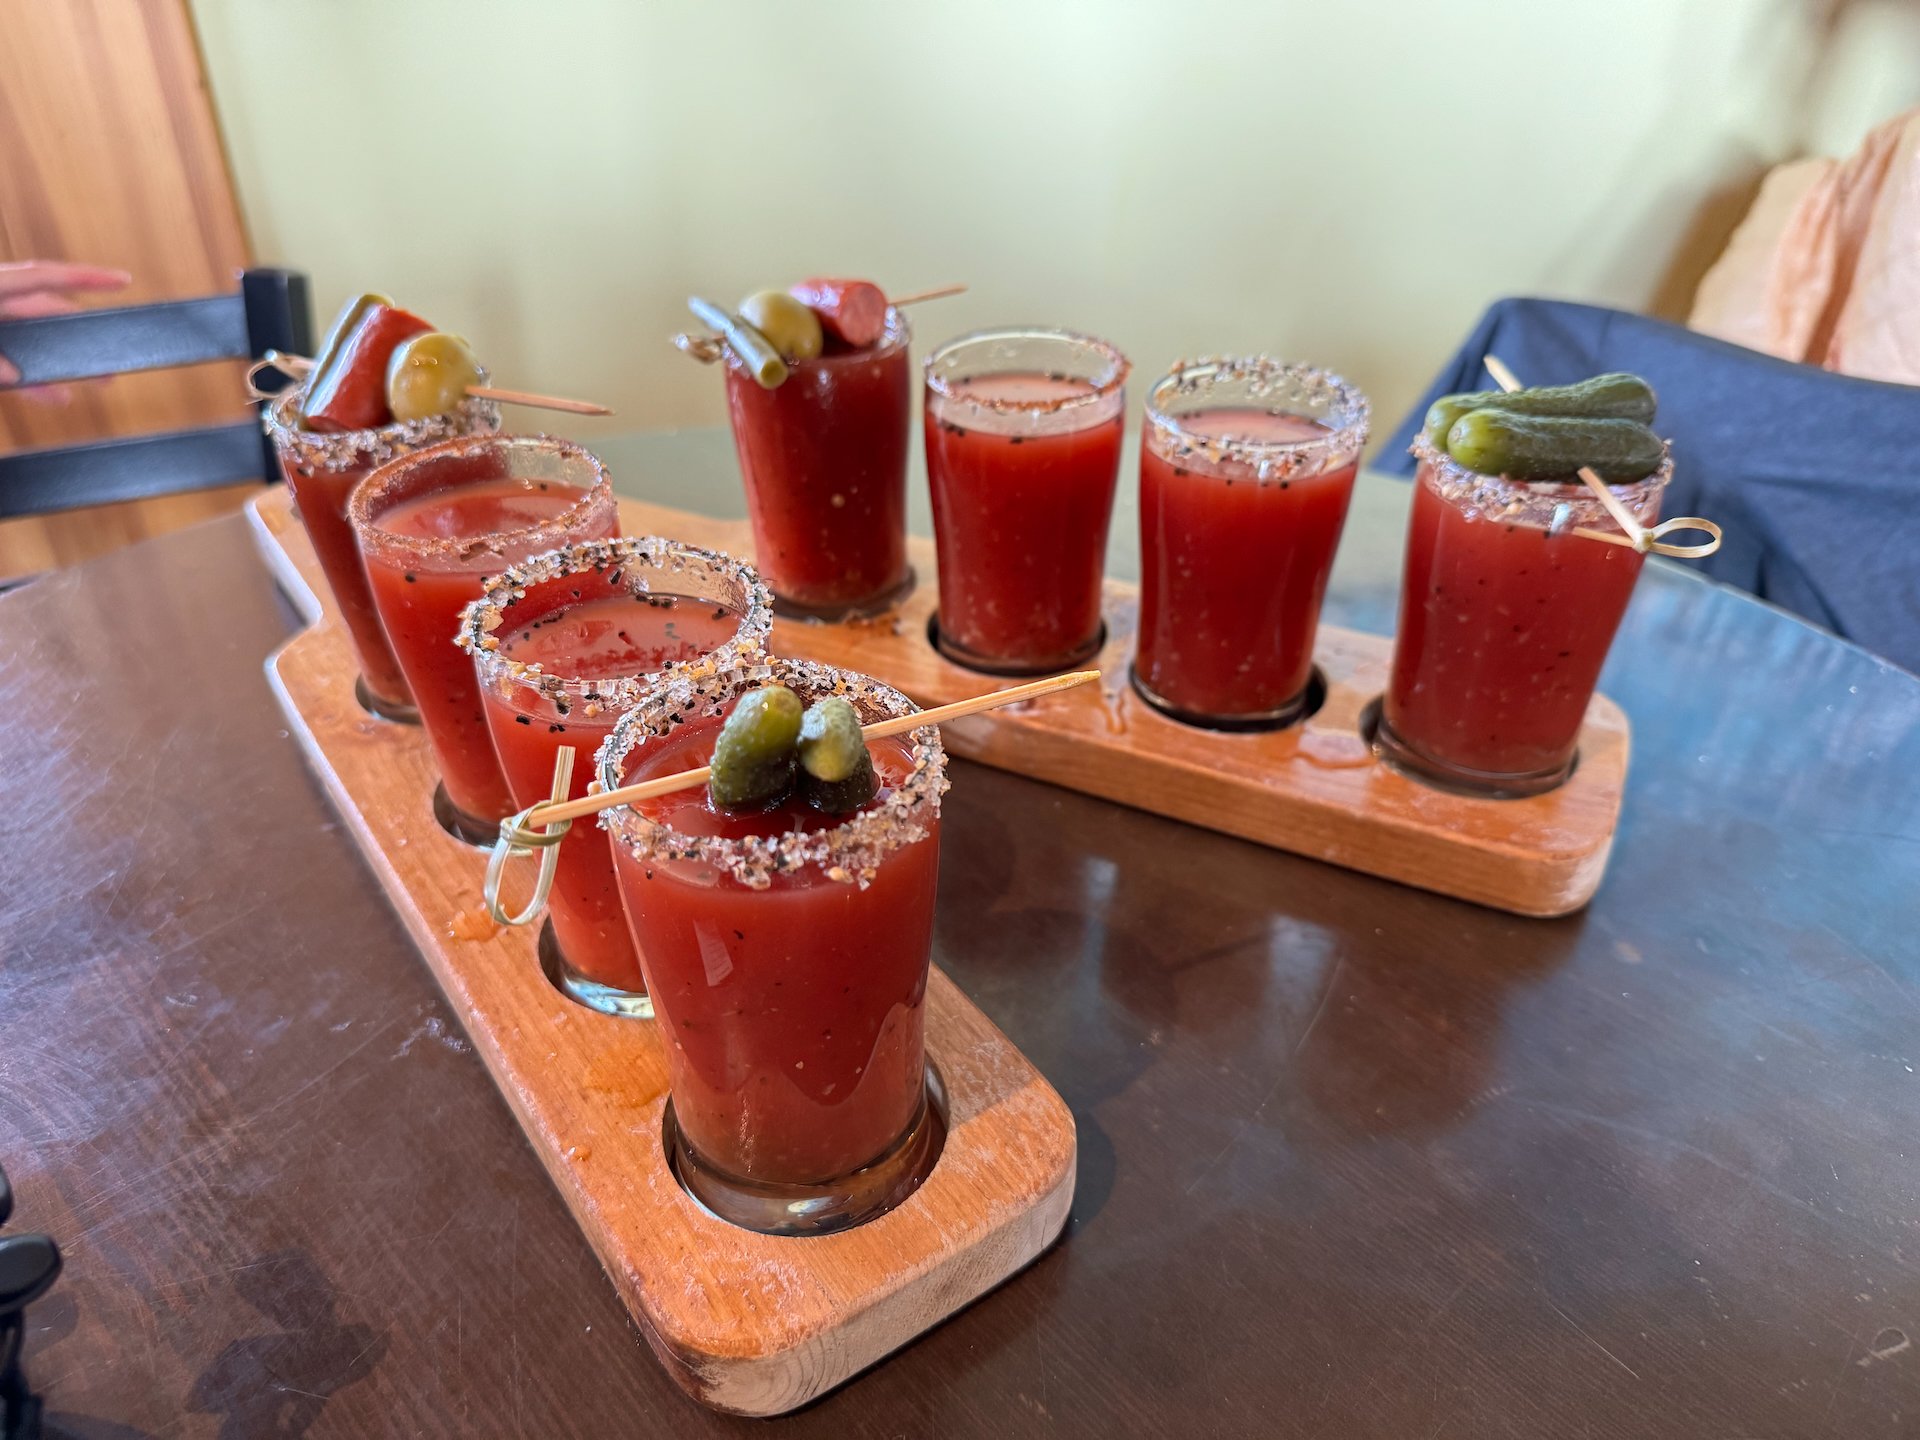  They were doing caesar flights at the bar, so we enjoyed one with our lunch.   